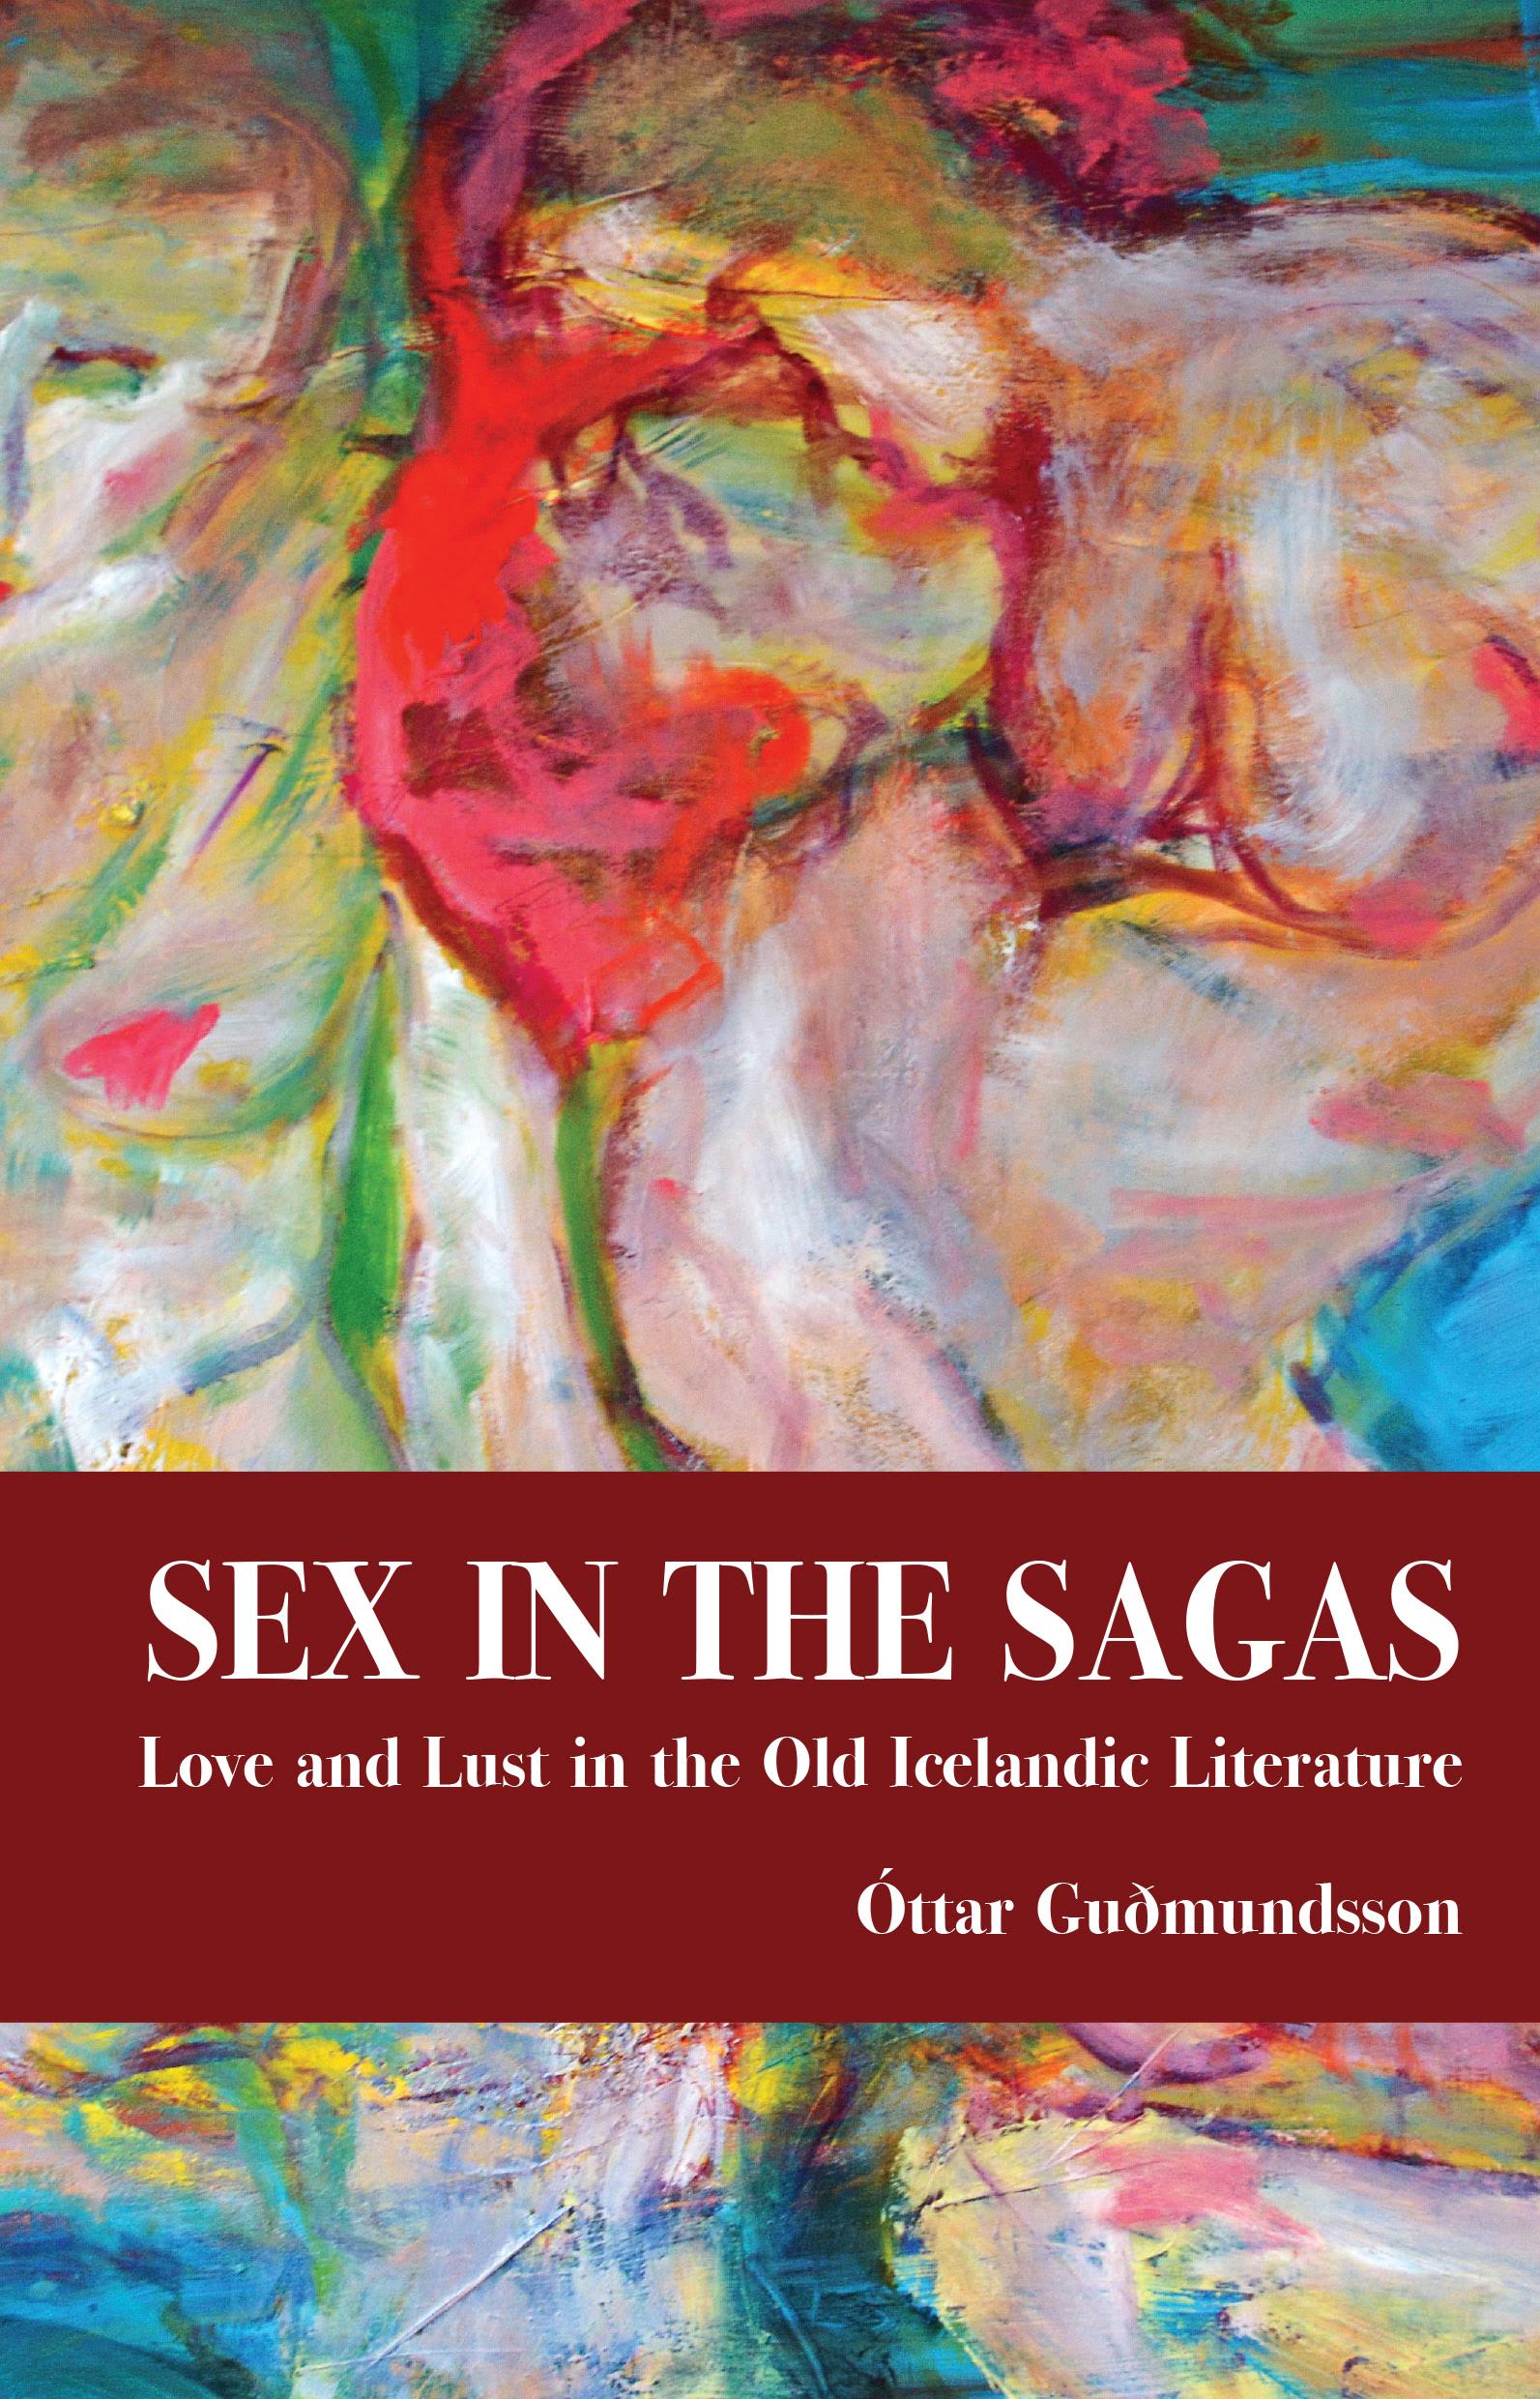 Sex in the Sagas